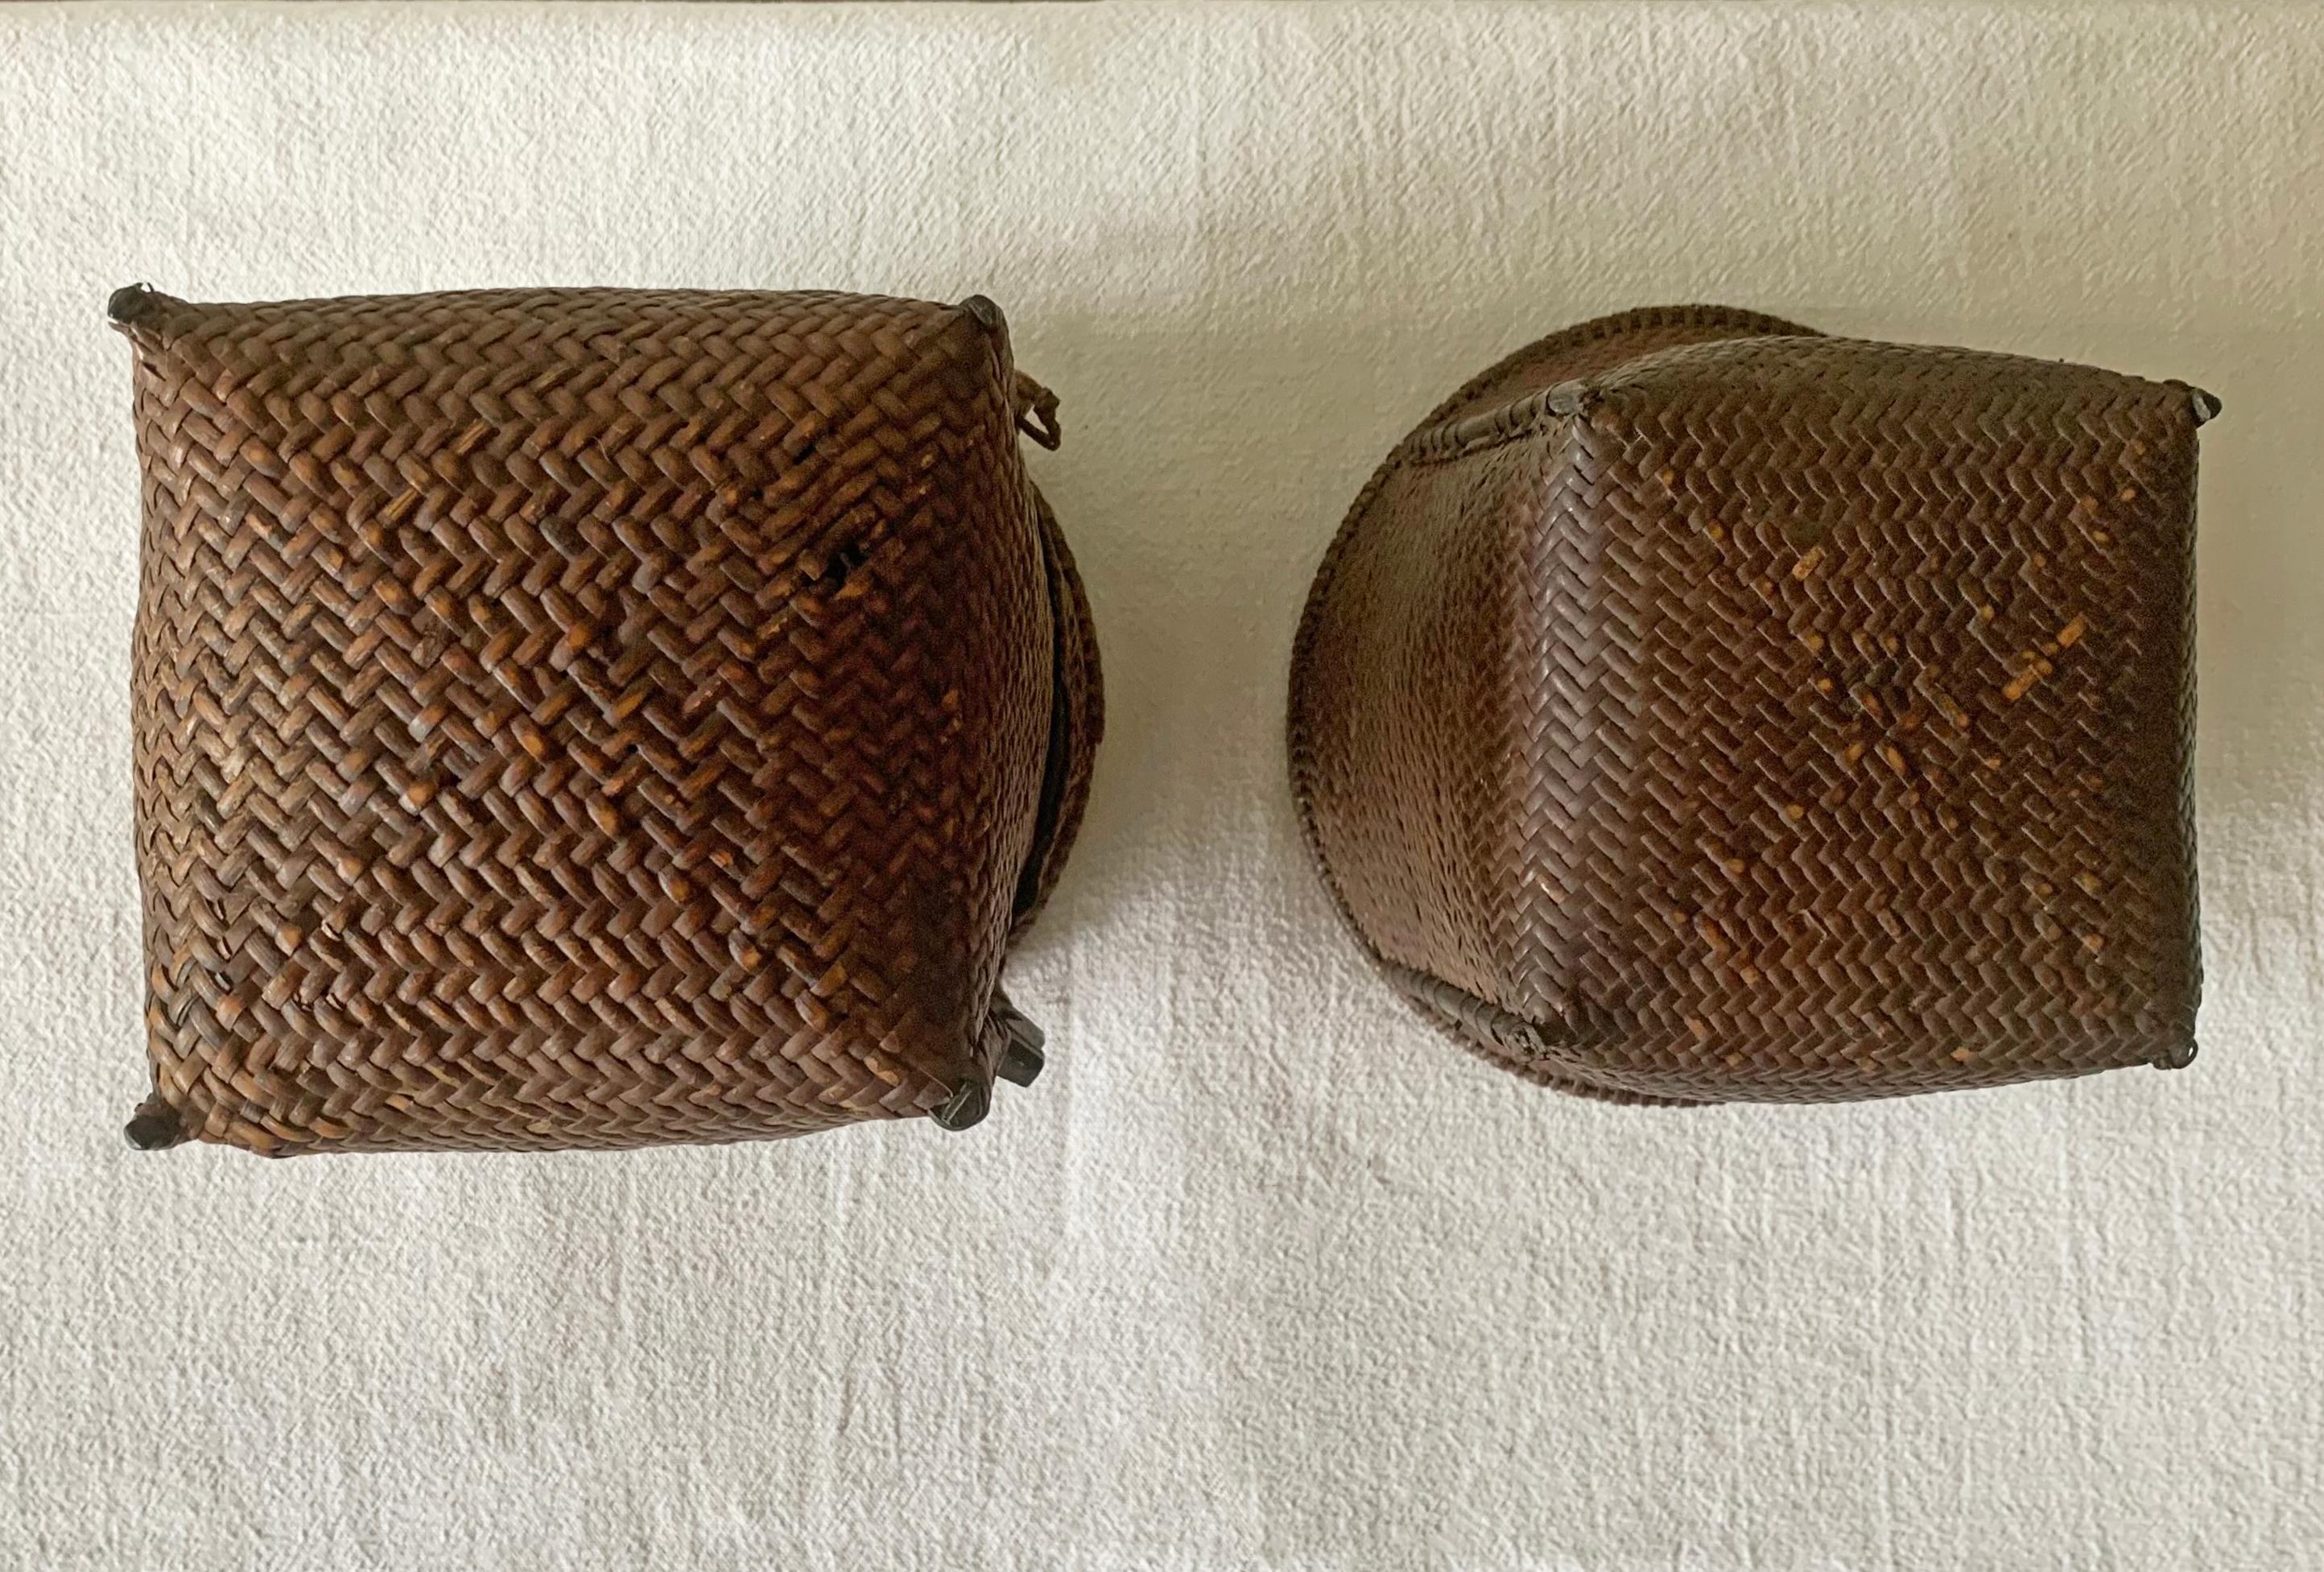 Rattan Basket Dayak Tribe Hand-Woven from Kalimantan, Borneo, Mid 20th Century For Sale 4